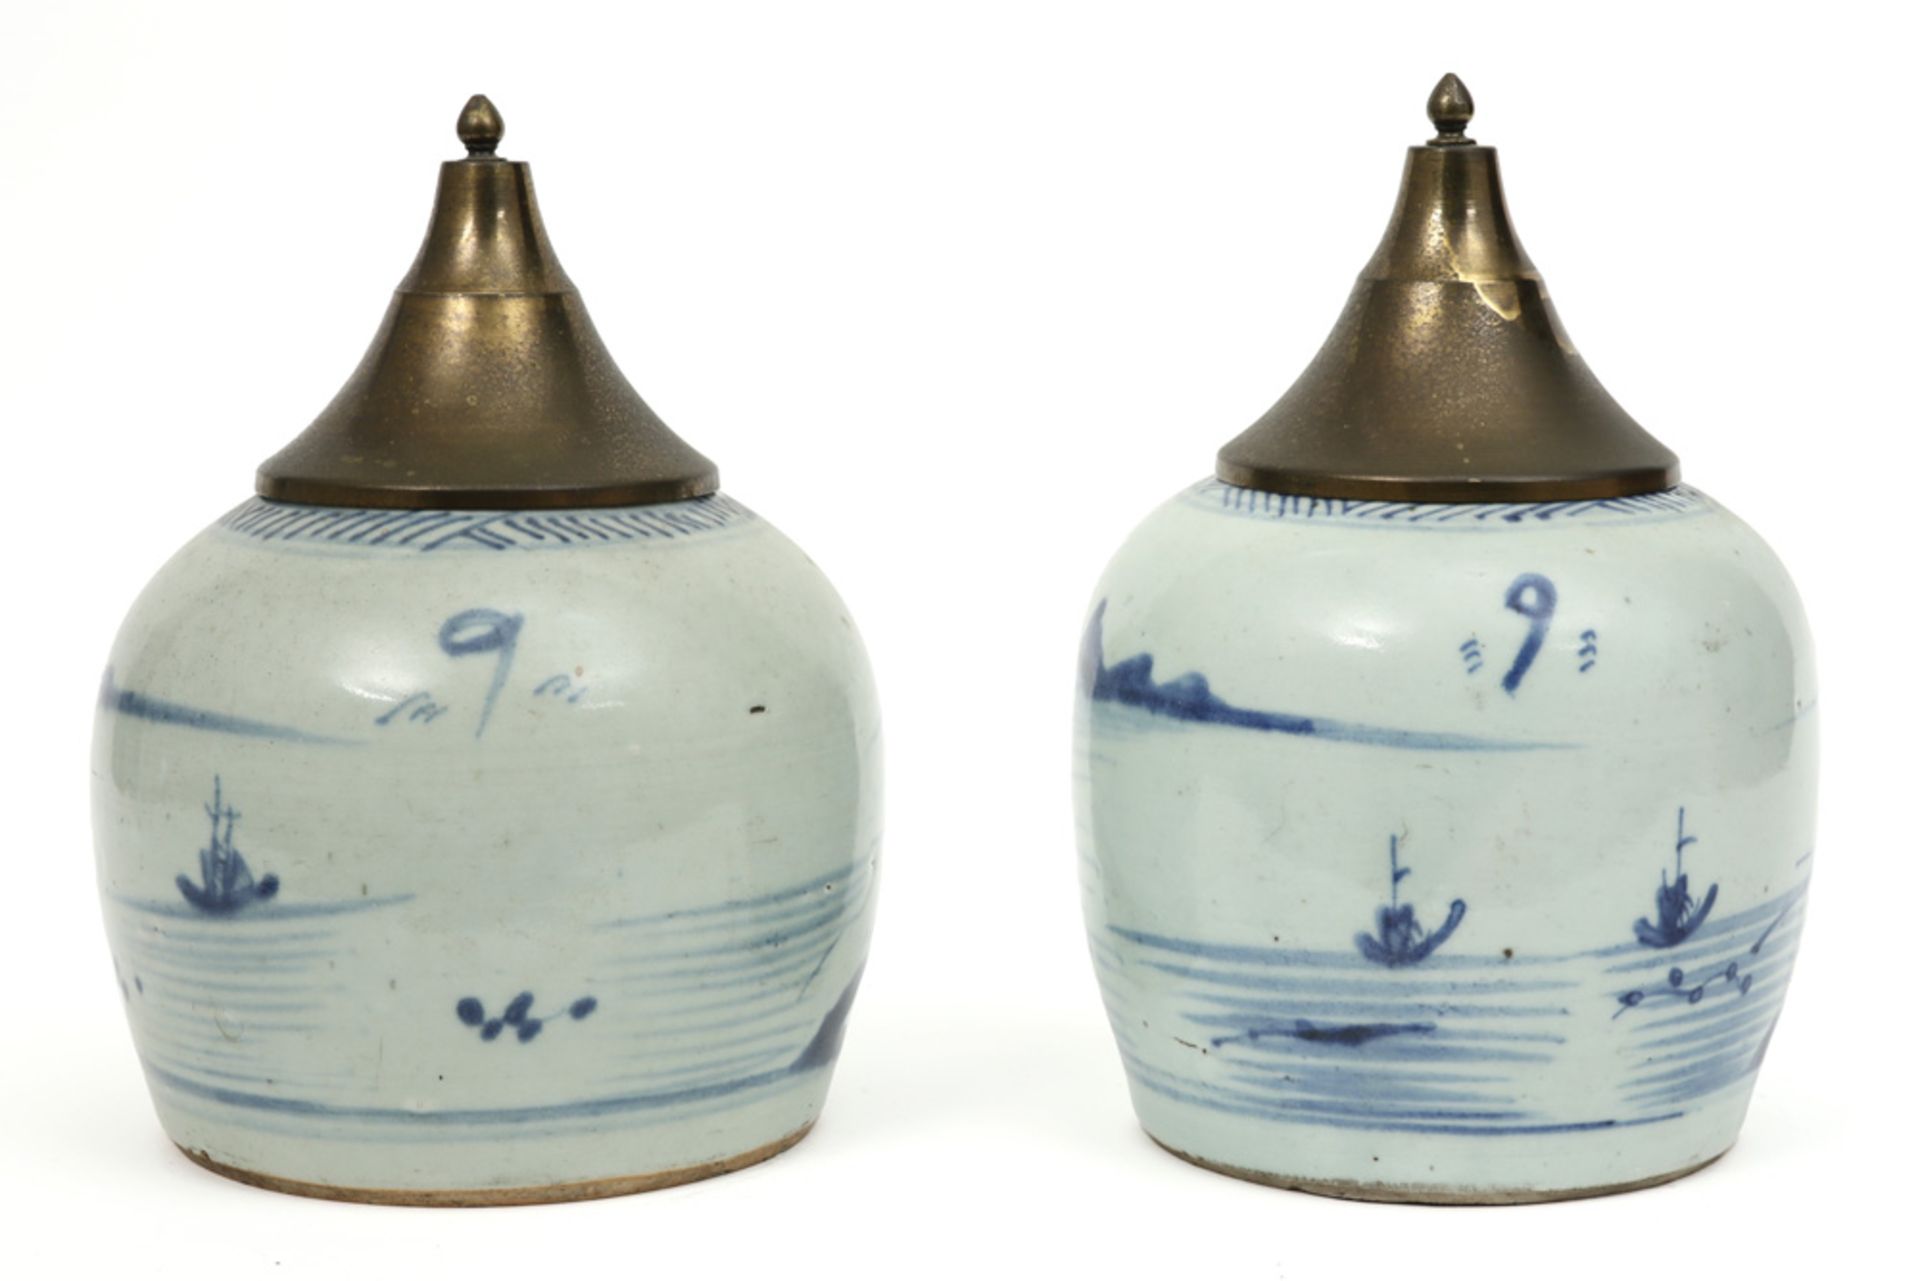 pair of antique Chinese jars in porcelain with a blue-white decor - each with an antique brass lid - Image 2 of 4